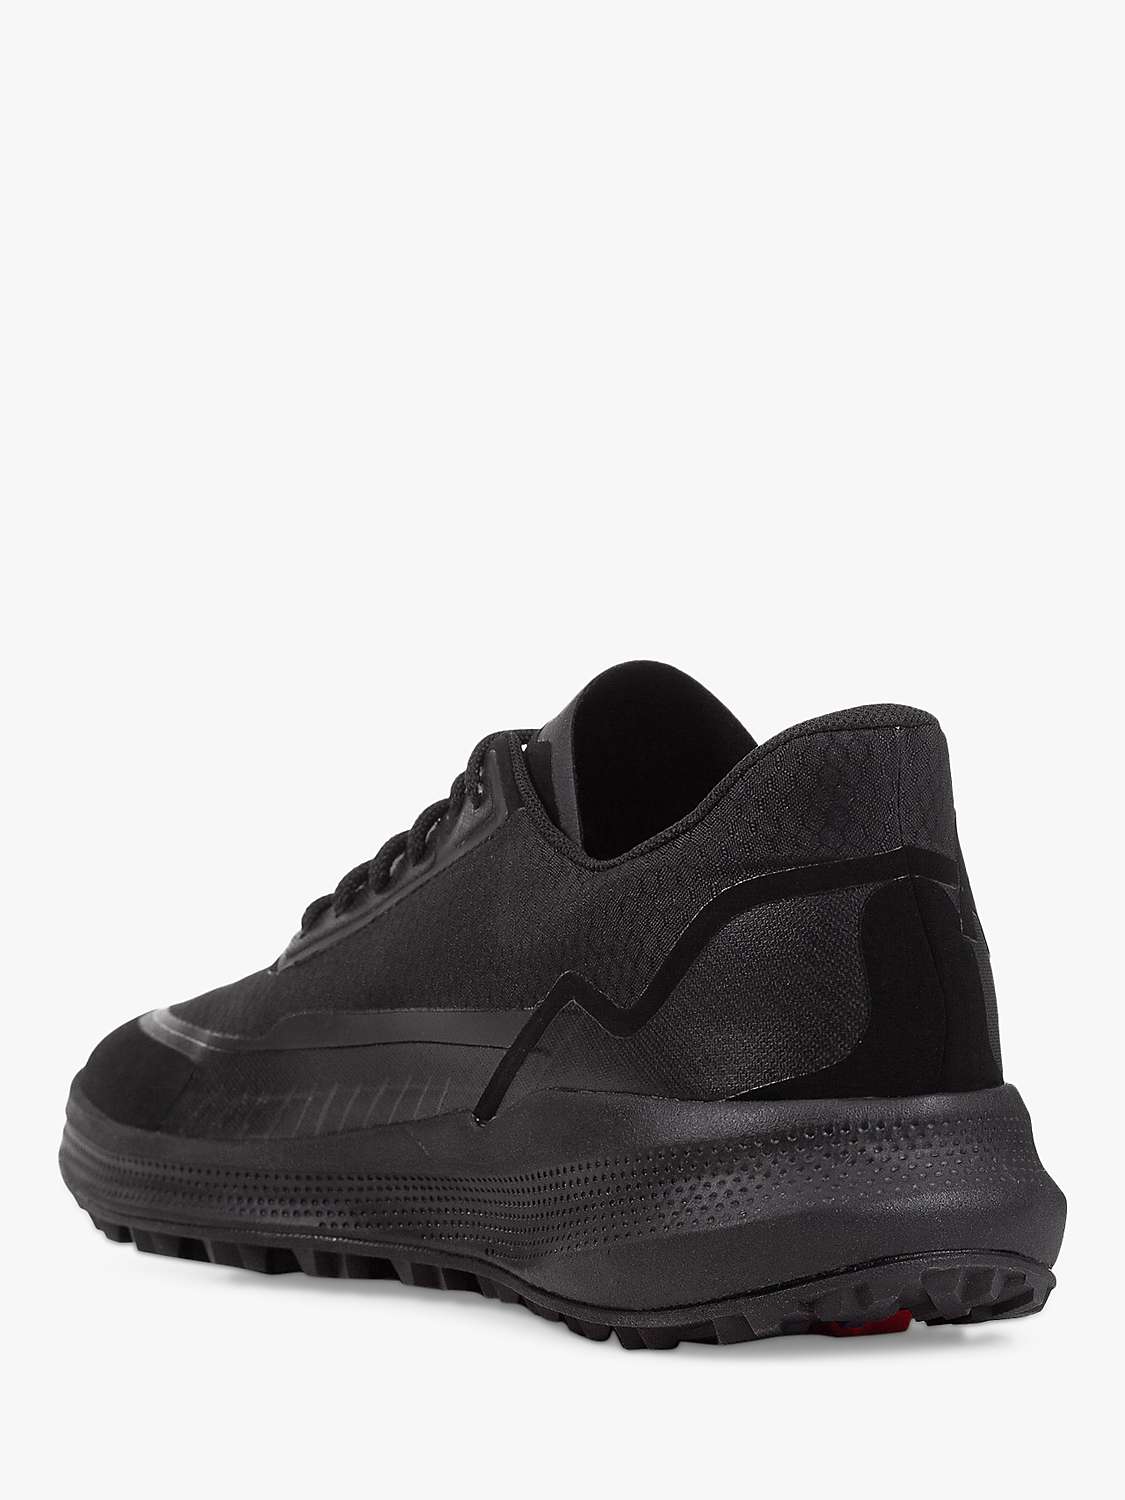 Geox PG1X Amphibiox Textured Trainers, Black at John Lewis & Partners